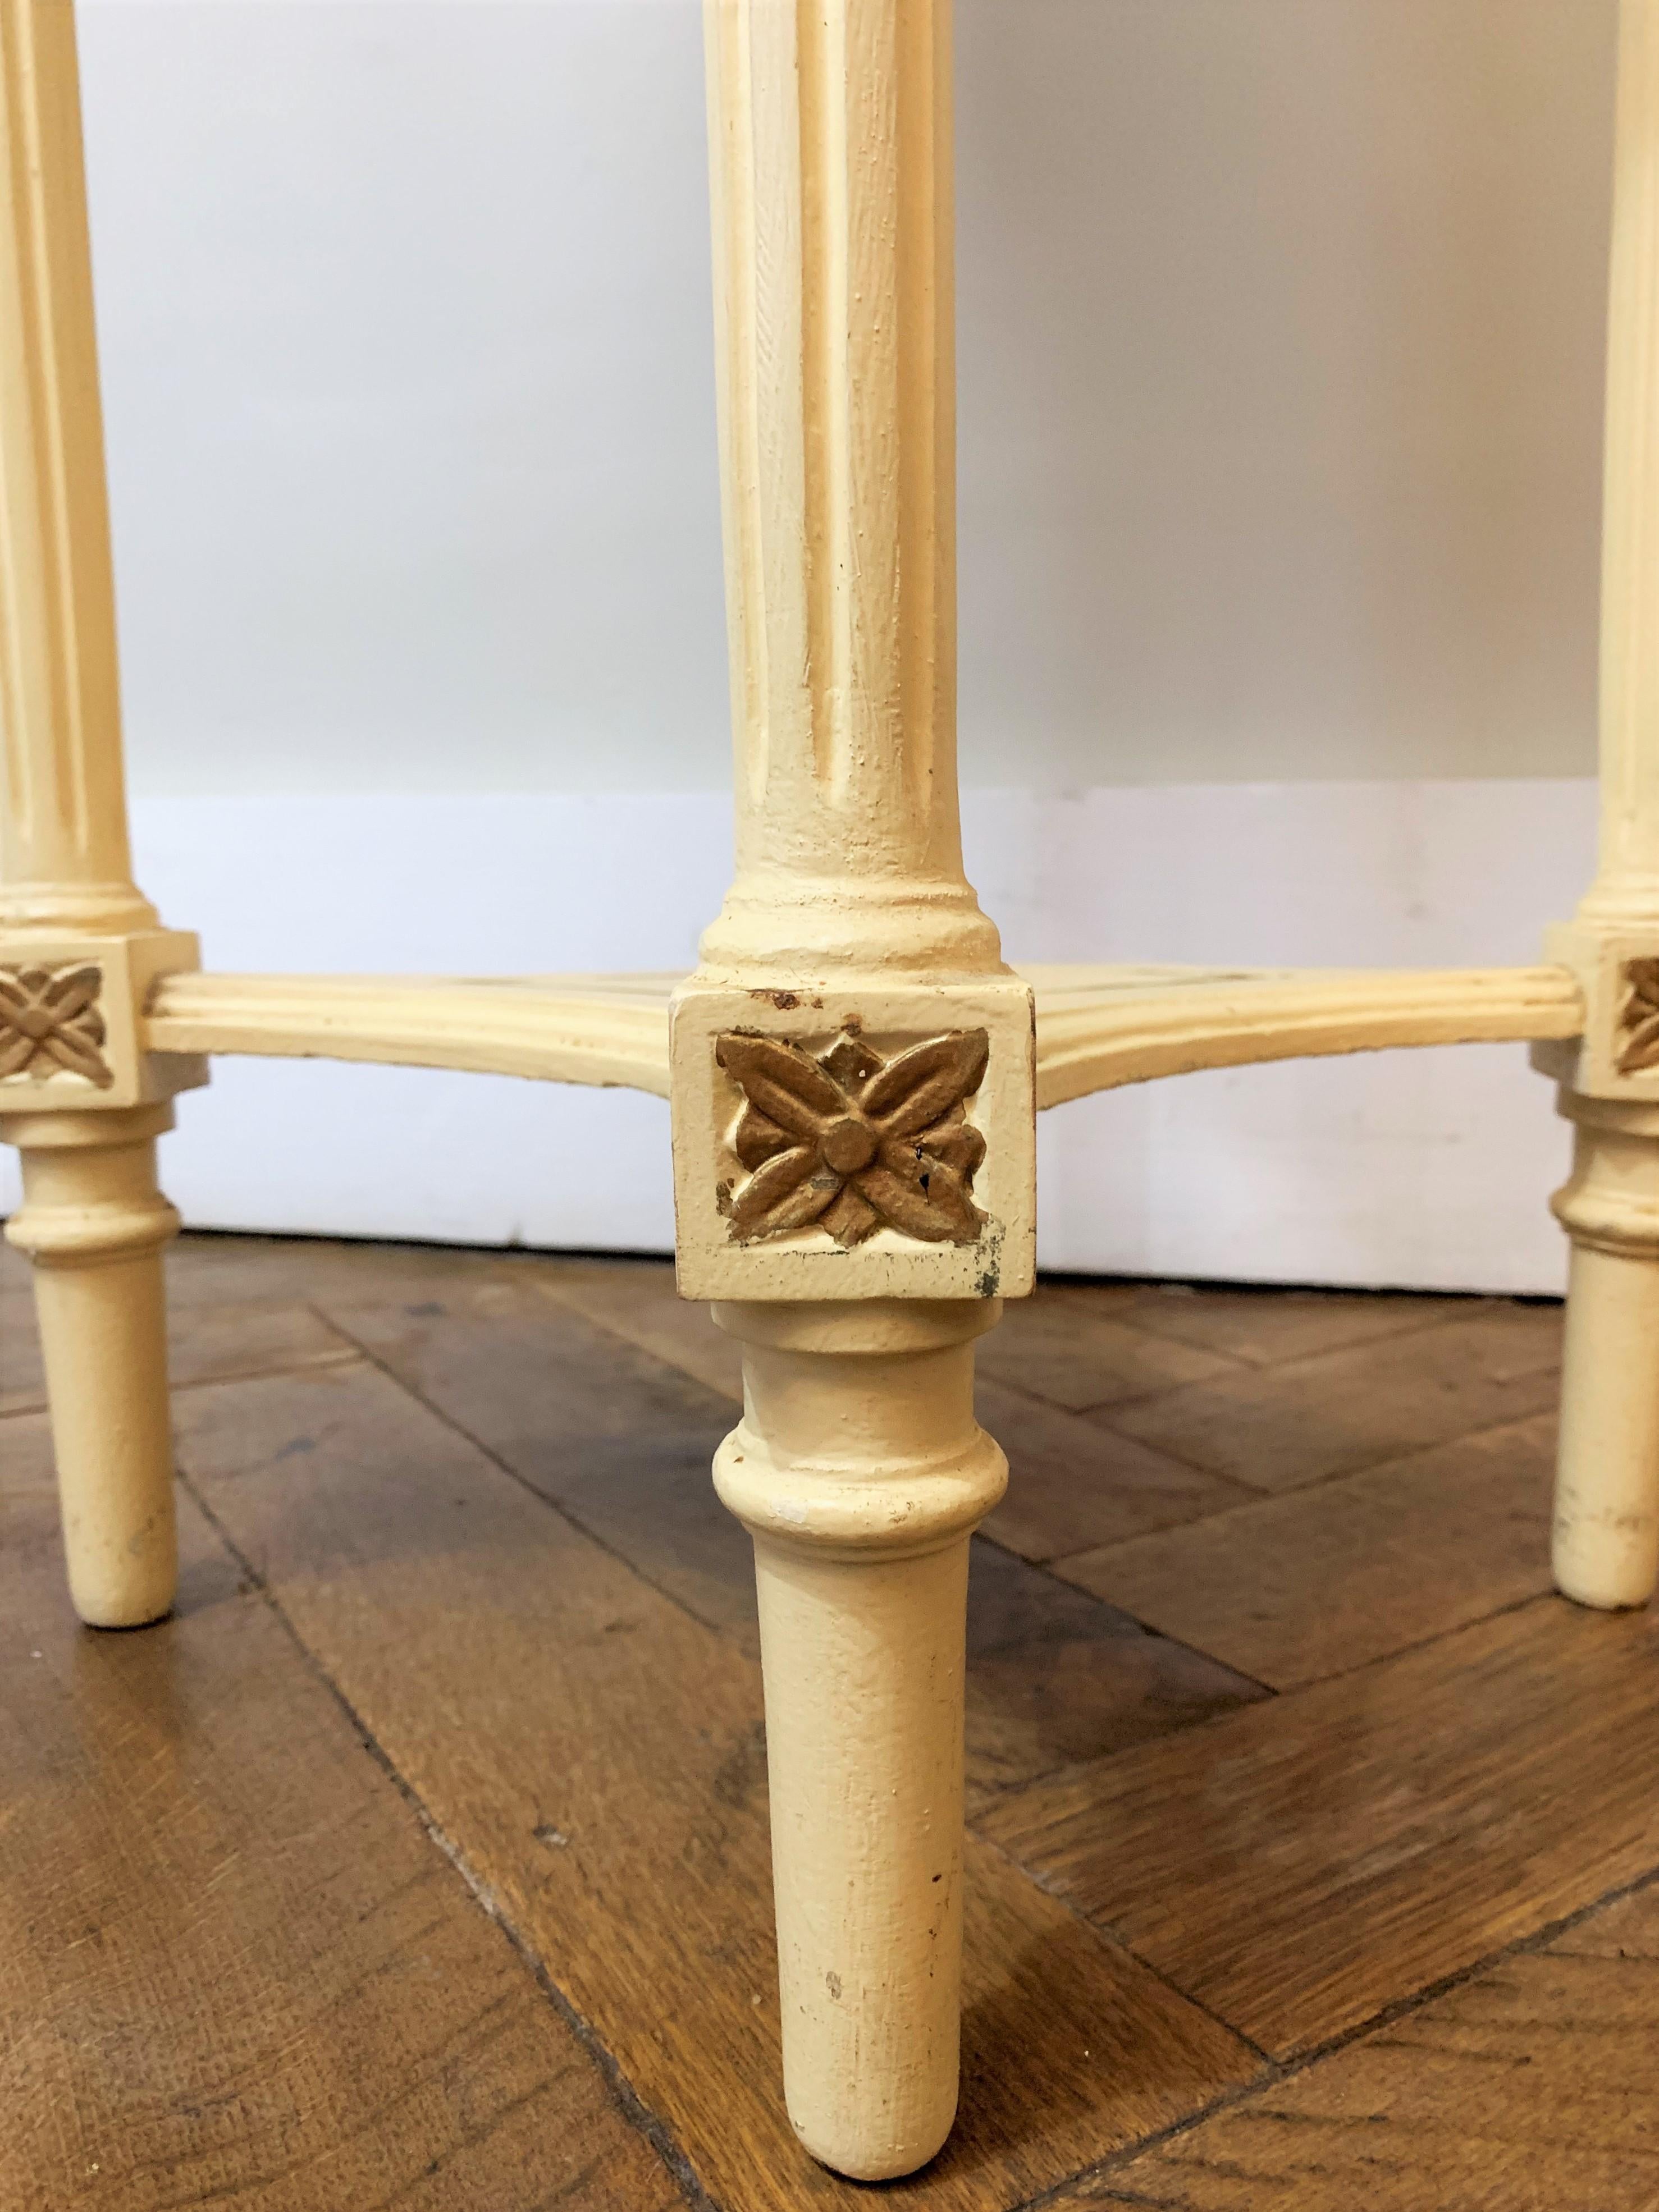 Very nice Louis 16 style sellette from the Napoleon 3 period. The top is made of white marble, the legs are connected by a spacer forming a top. The Louis 16 furniture is known for its return to antiquity and for its rigour as can be seen with the